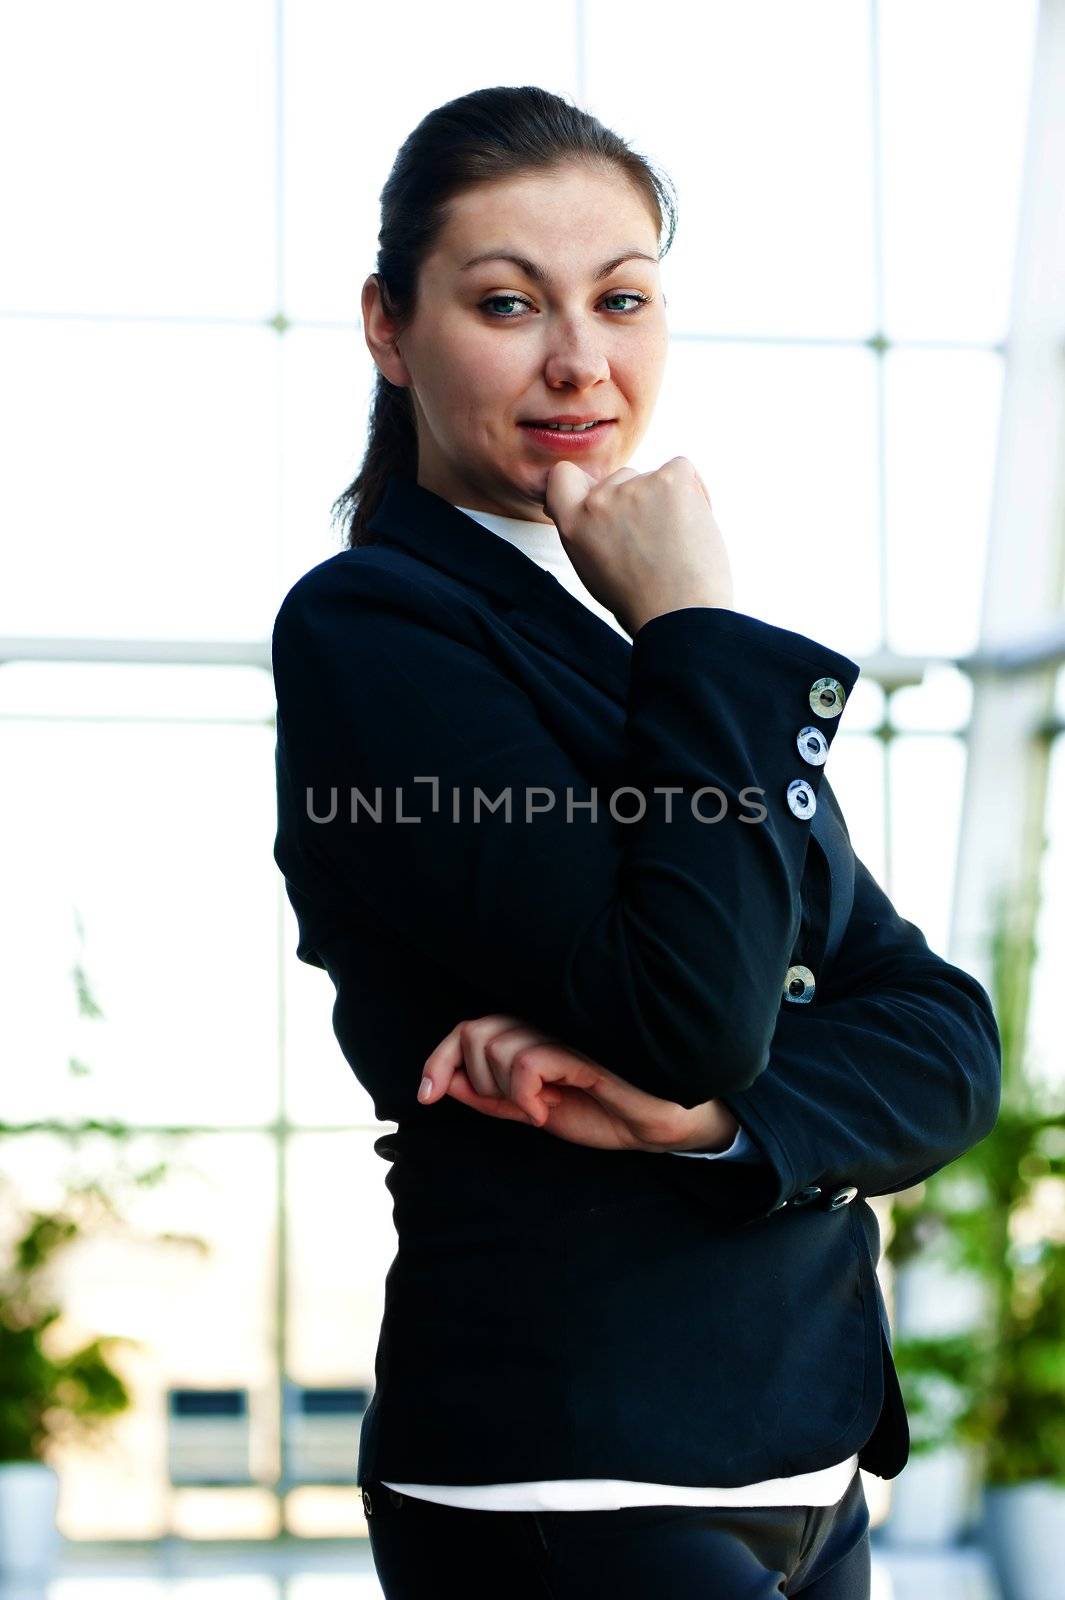 Portrait of a smiling girl on the background of the manager de-focus office interior